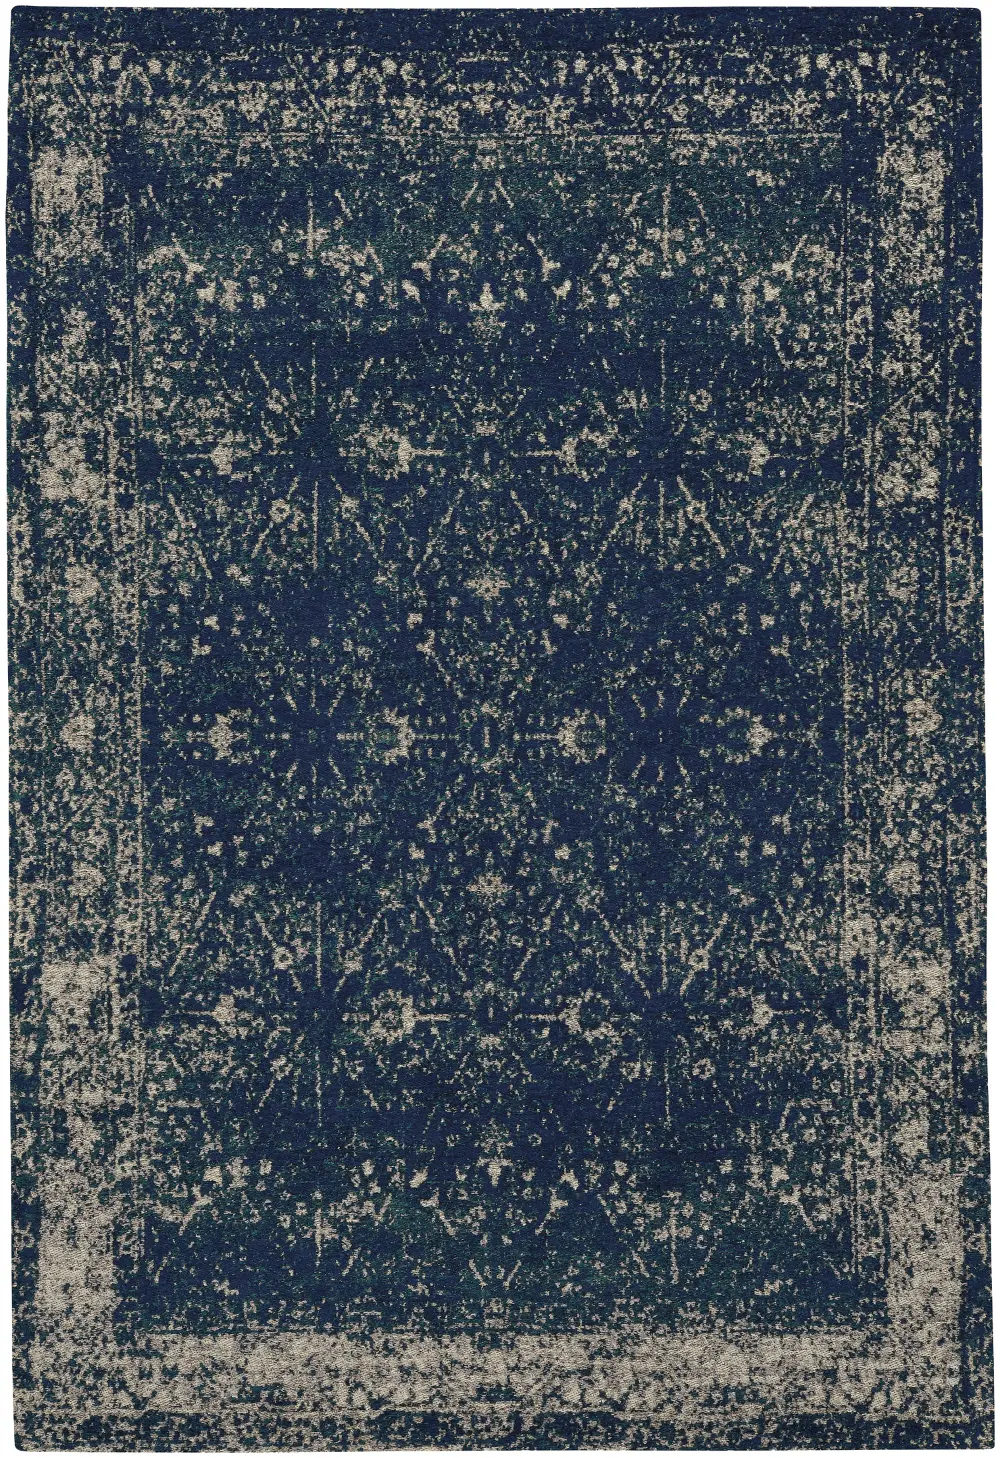 3243RS08001000440 8 x 10 Large Sapphire Blue Area Rug - Cosmic-Star-1